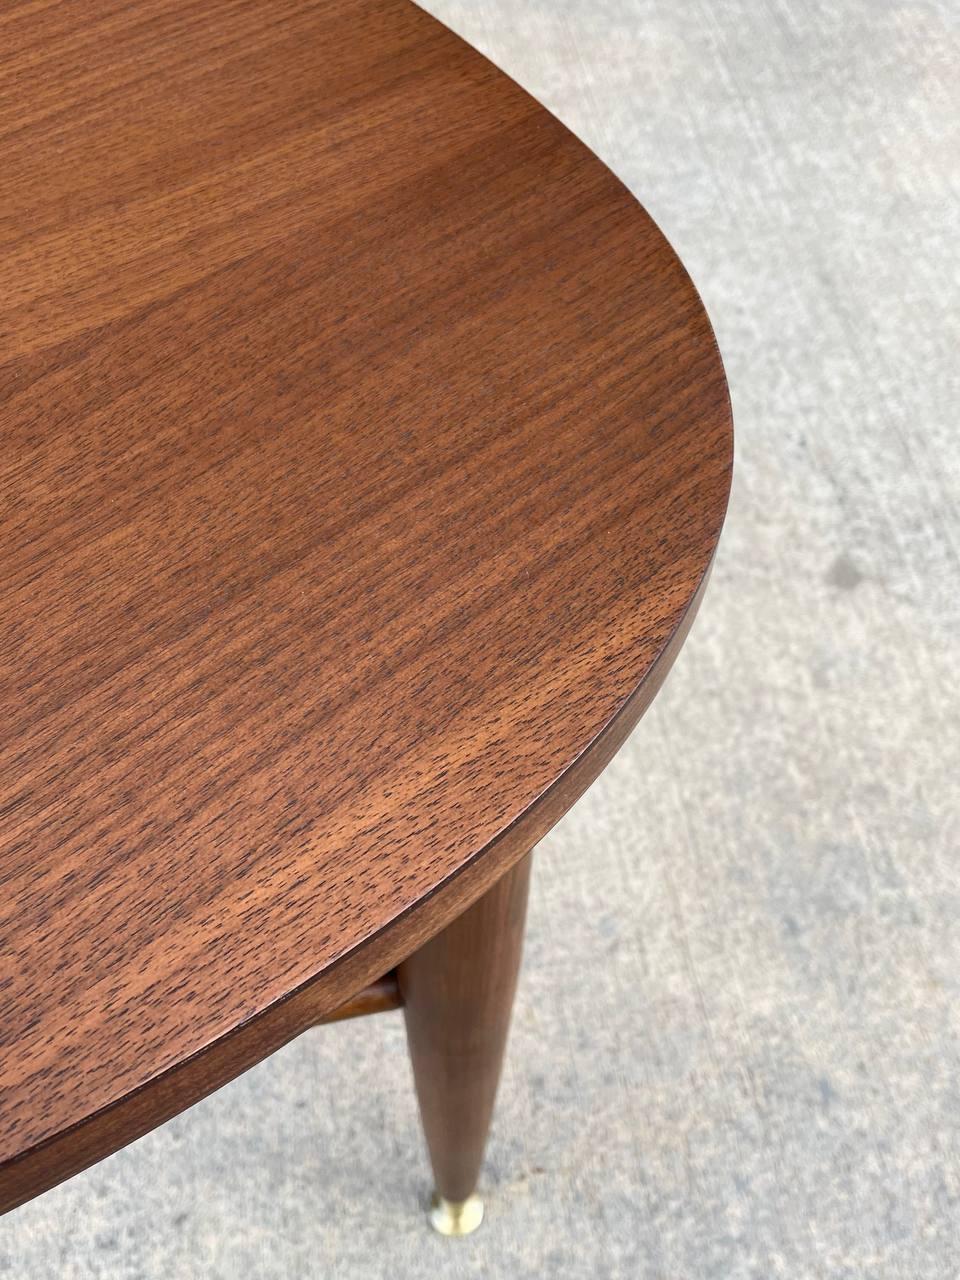 Mid-20th Century Newly Refinished - Mid-Century Modern Walnut Guitar Pick Style Side Table For Sale